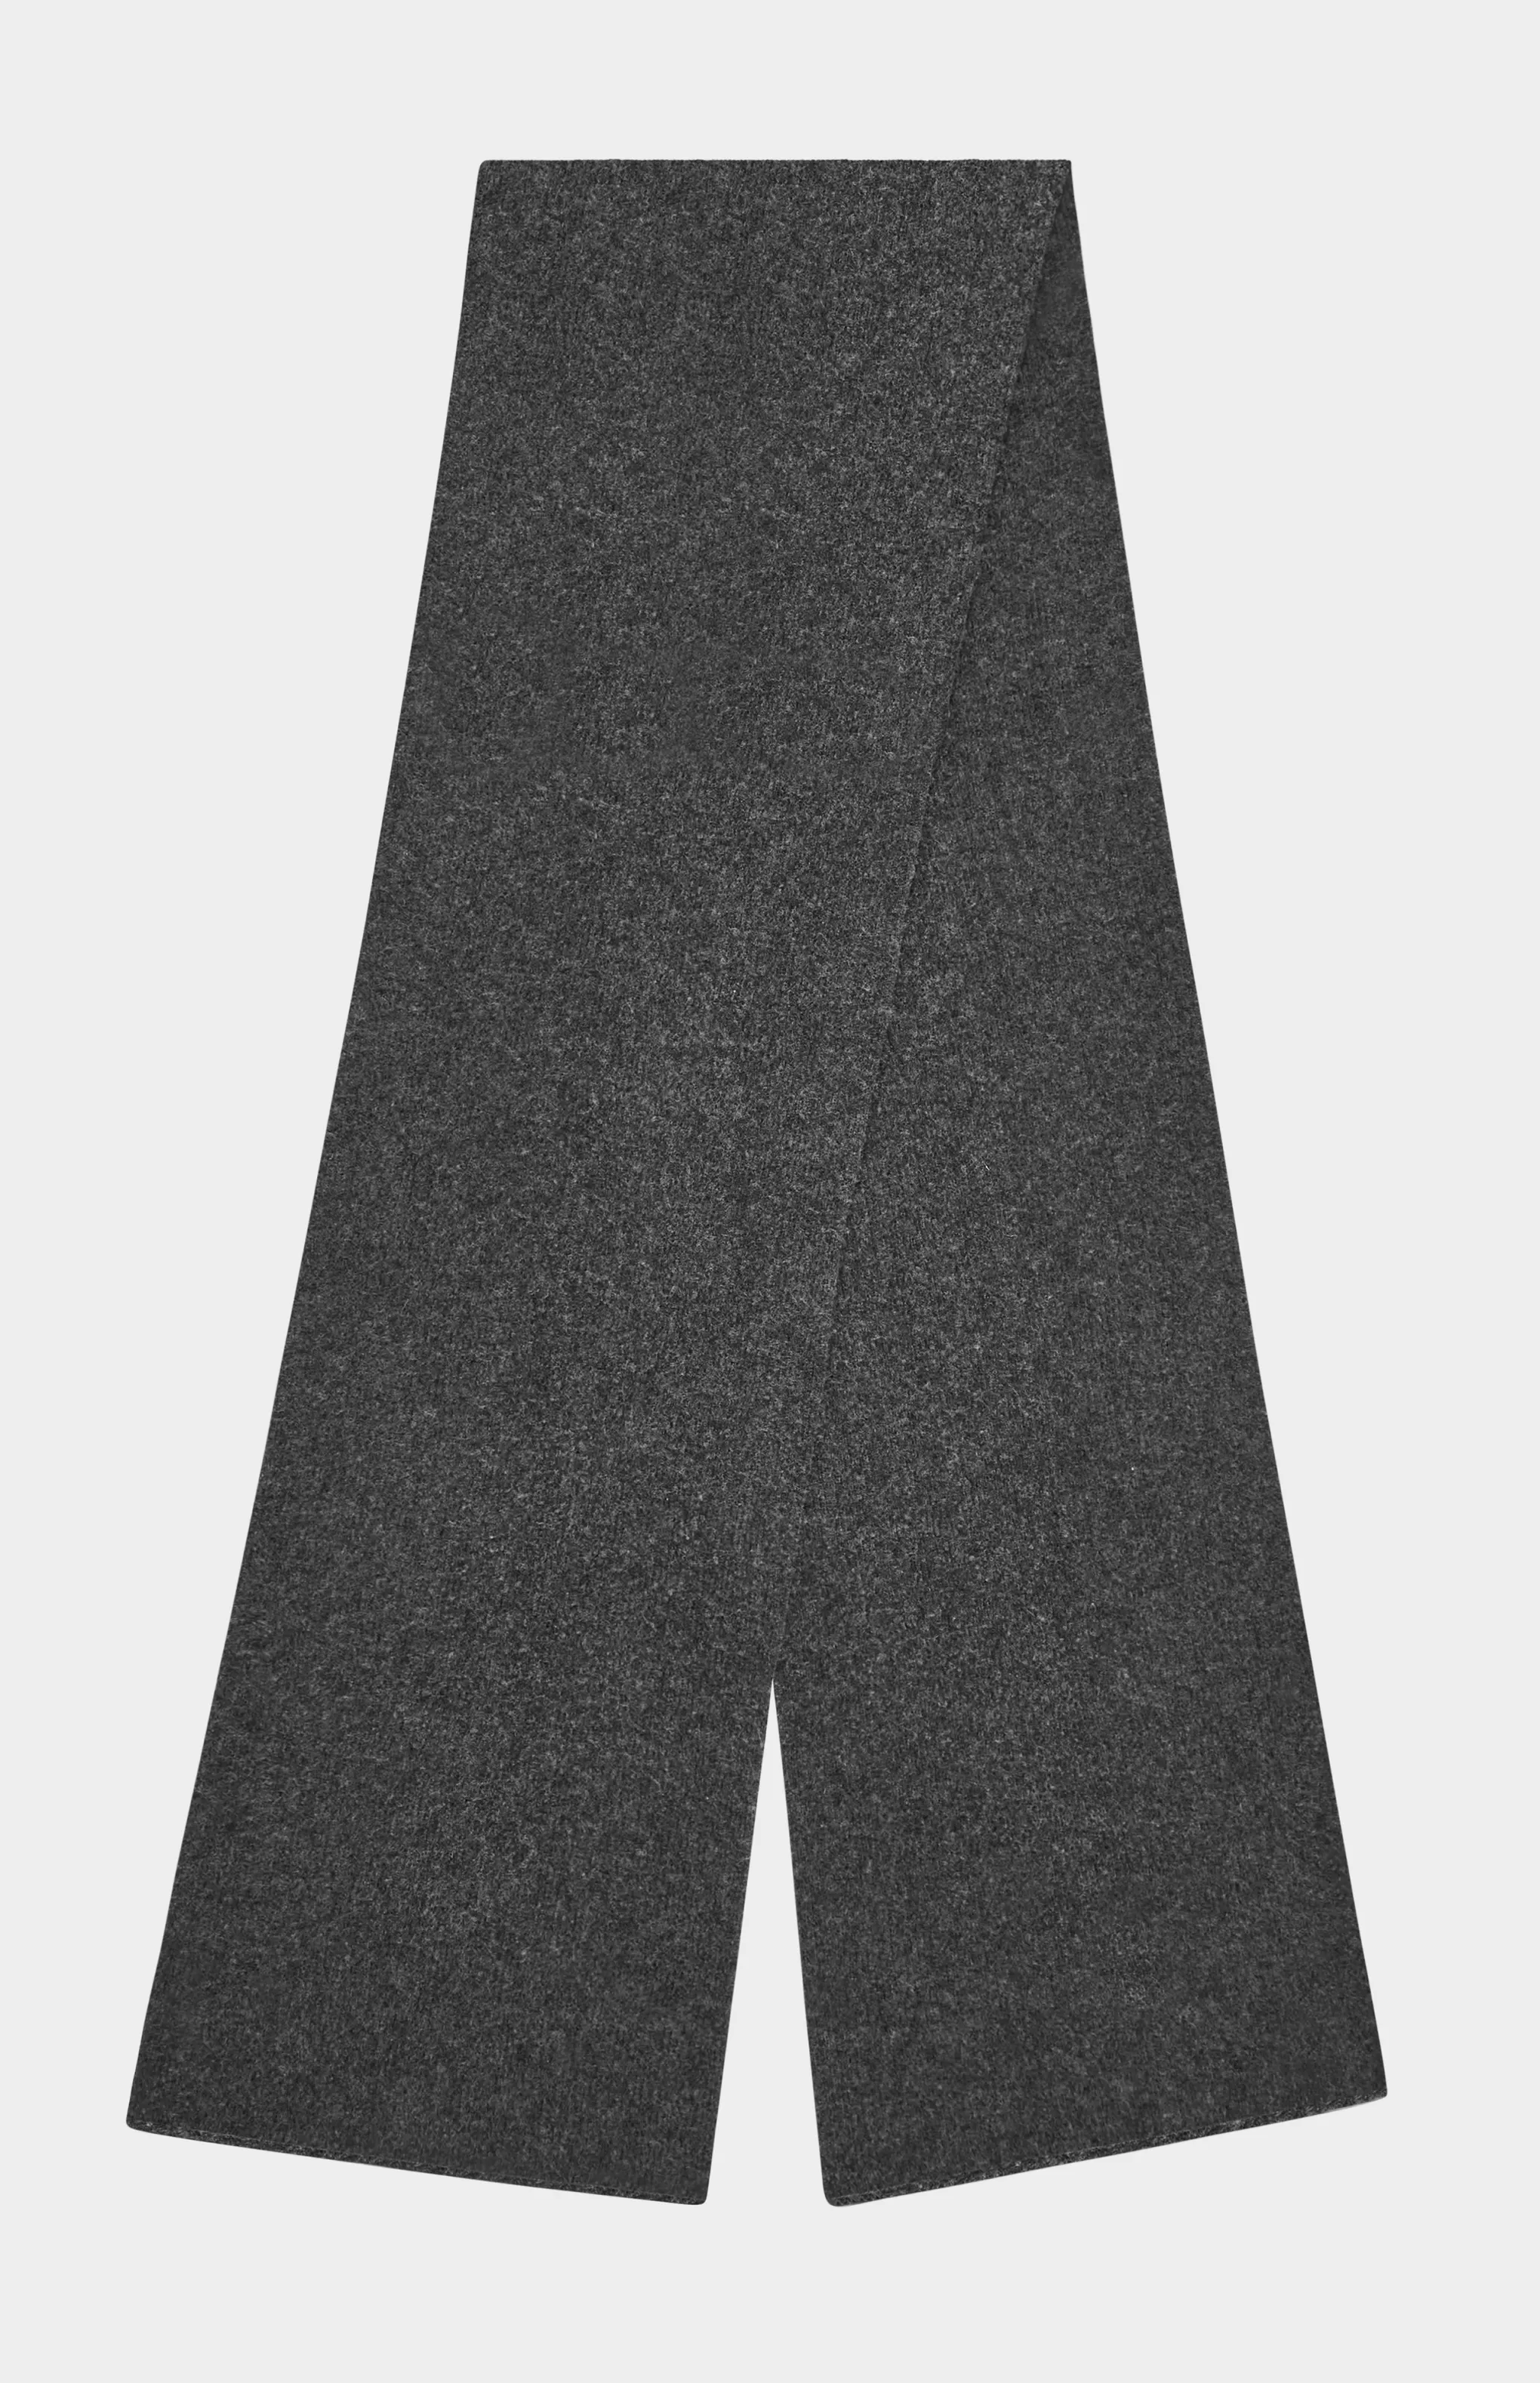 Clearance Cashmere Blend Scarf With Allover Fine Rib In Charcoal Men Loungewear